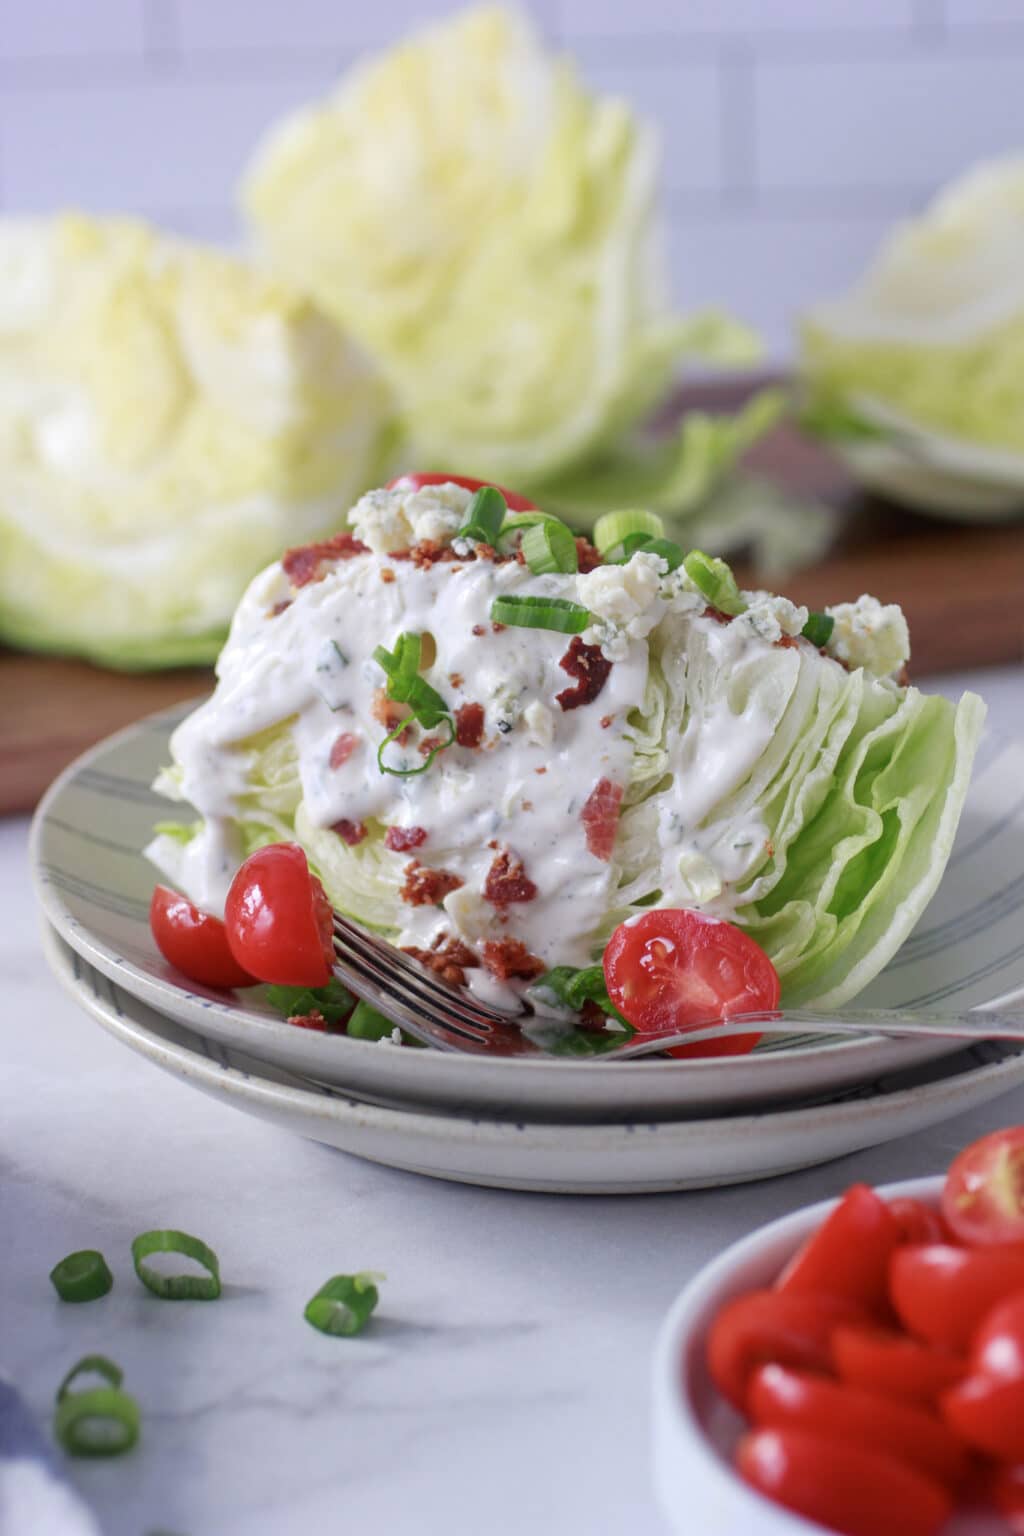 Steakhouse Blue Cheese Dressing Recipe - Cooking Up Memories